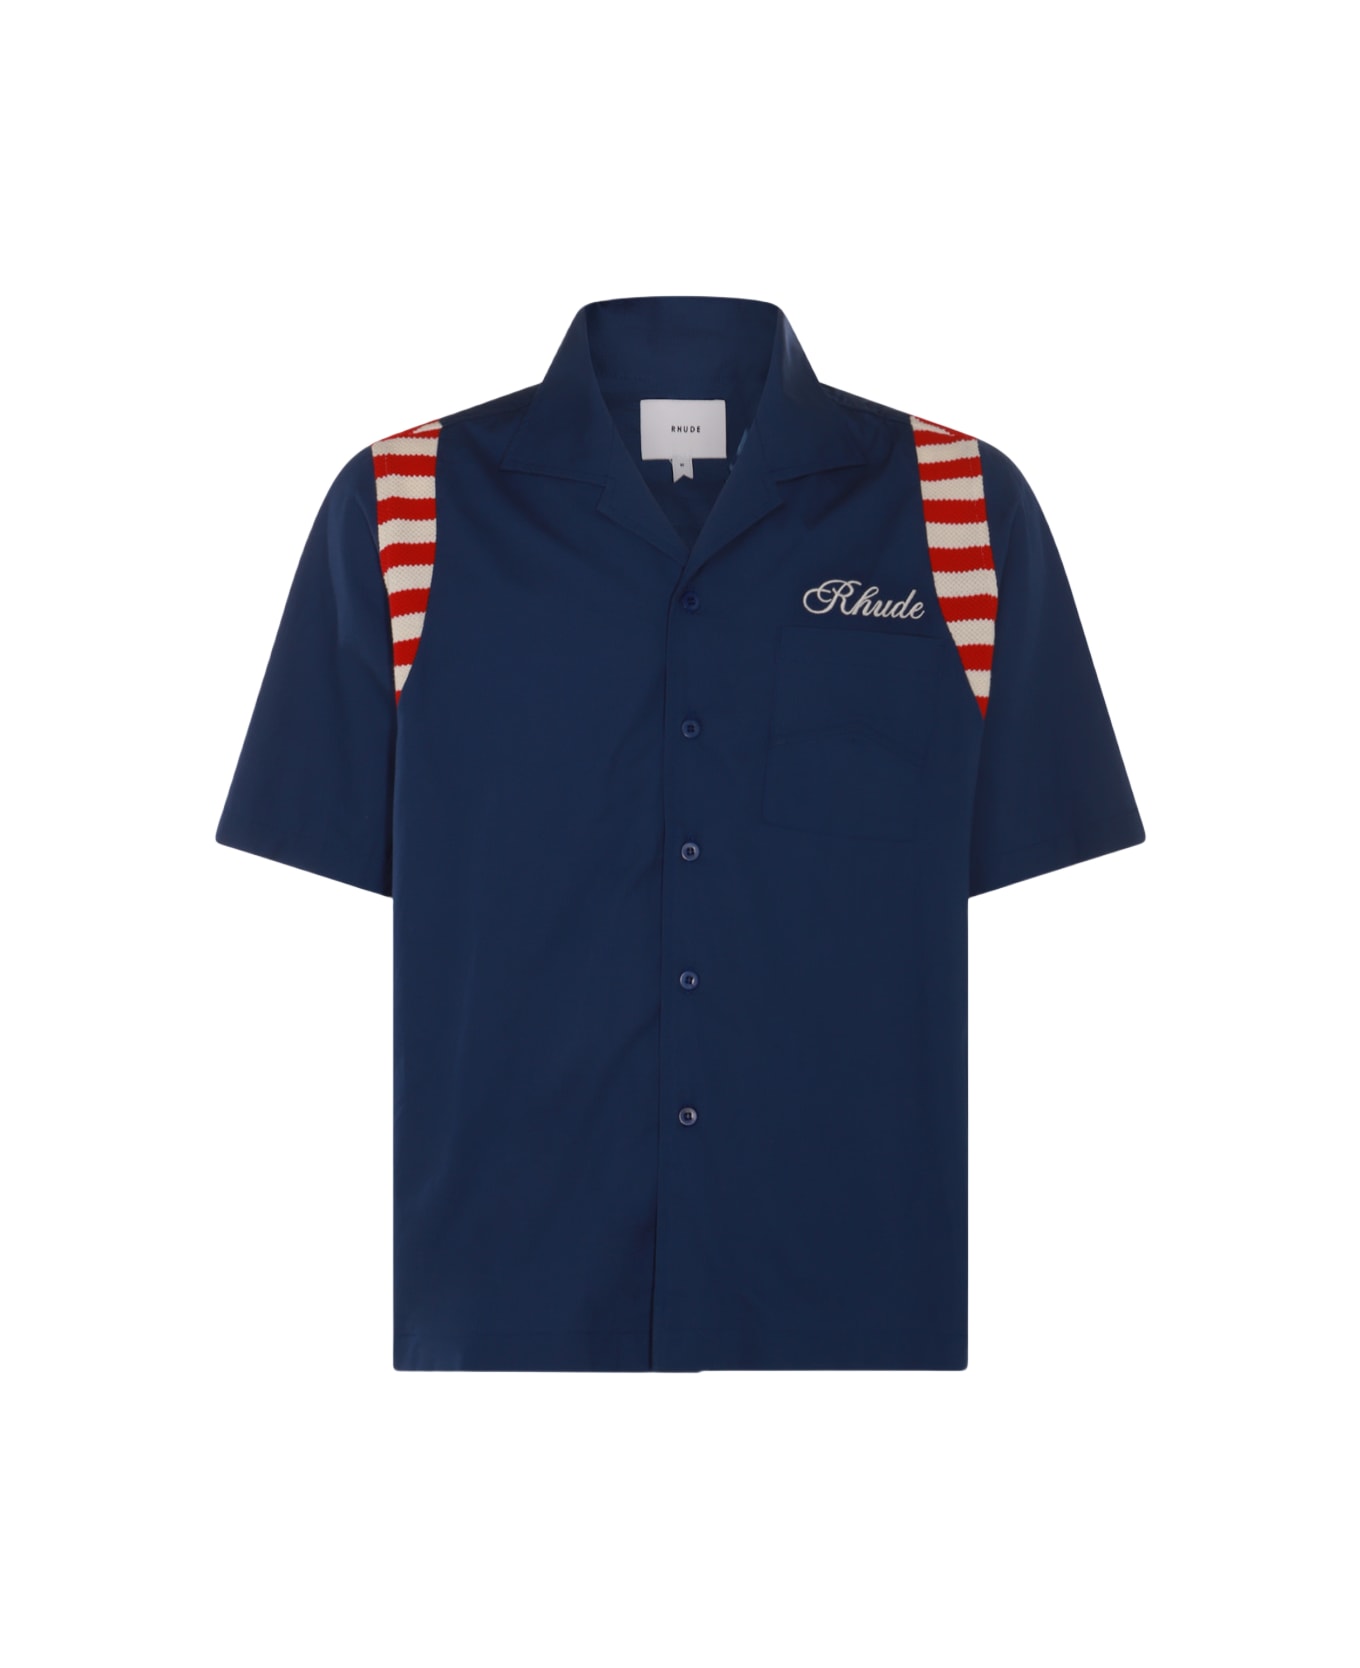 Rhude Navy Blue, Cream And Red Cotton Shirt - Blue